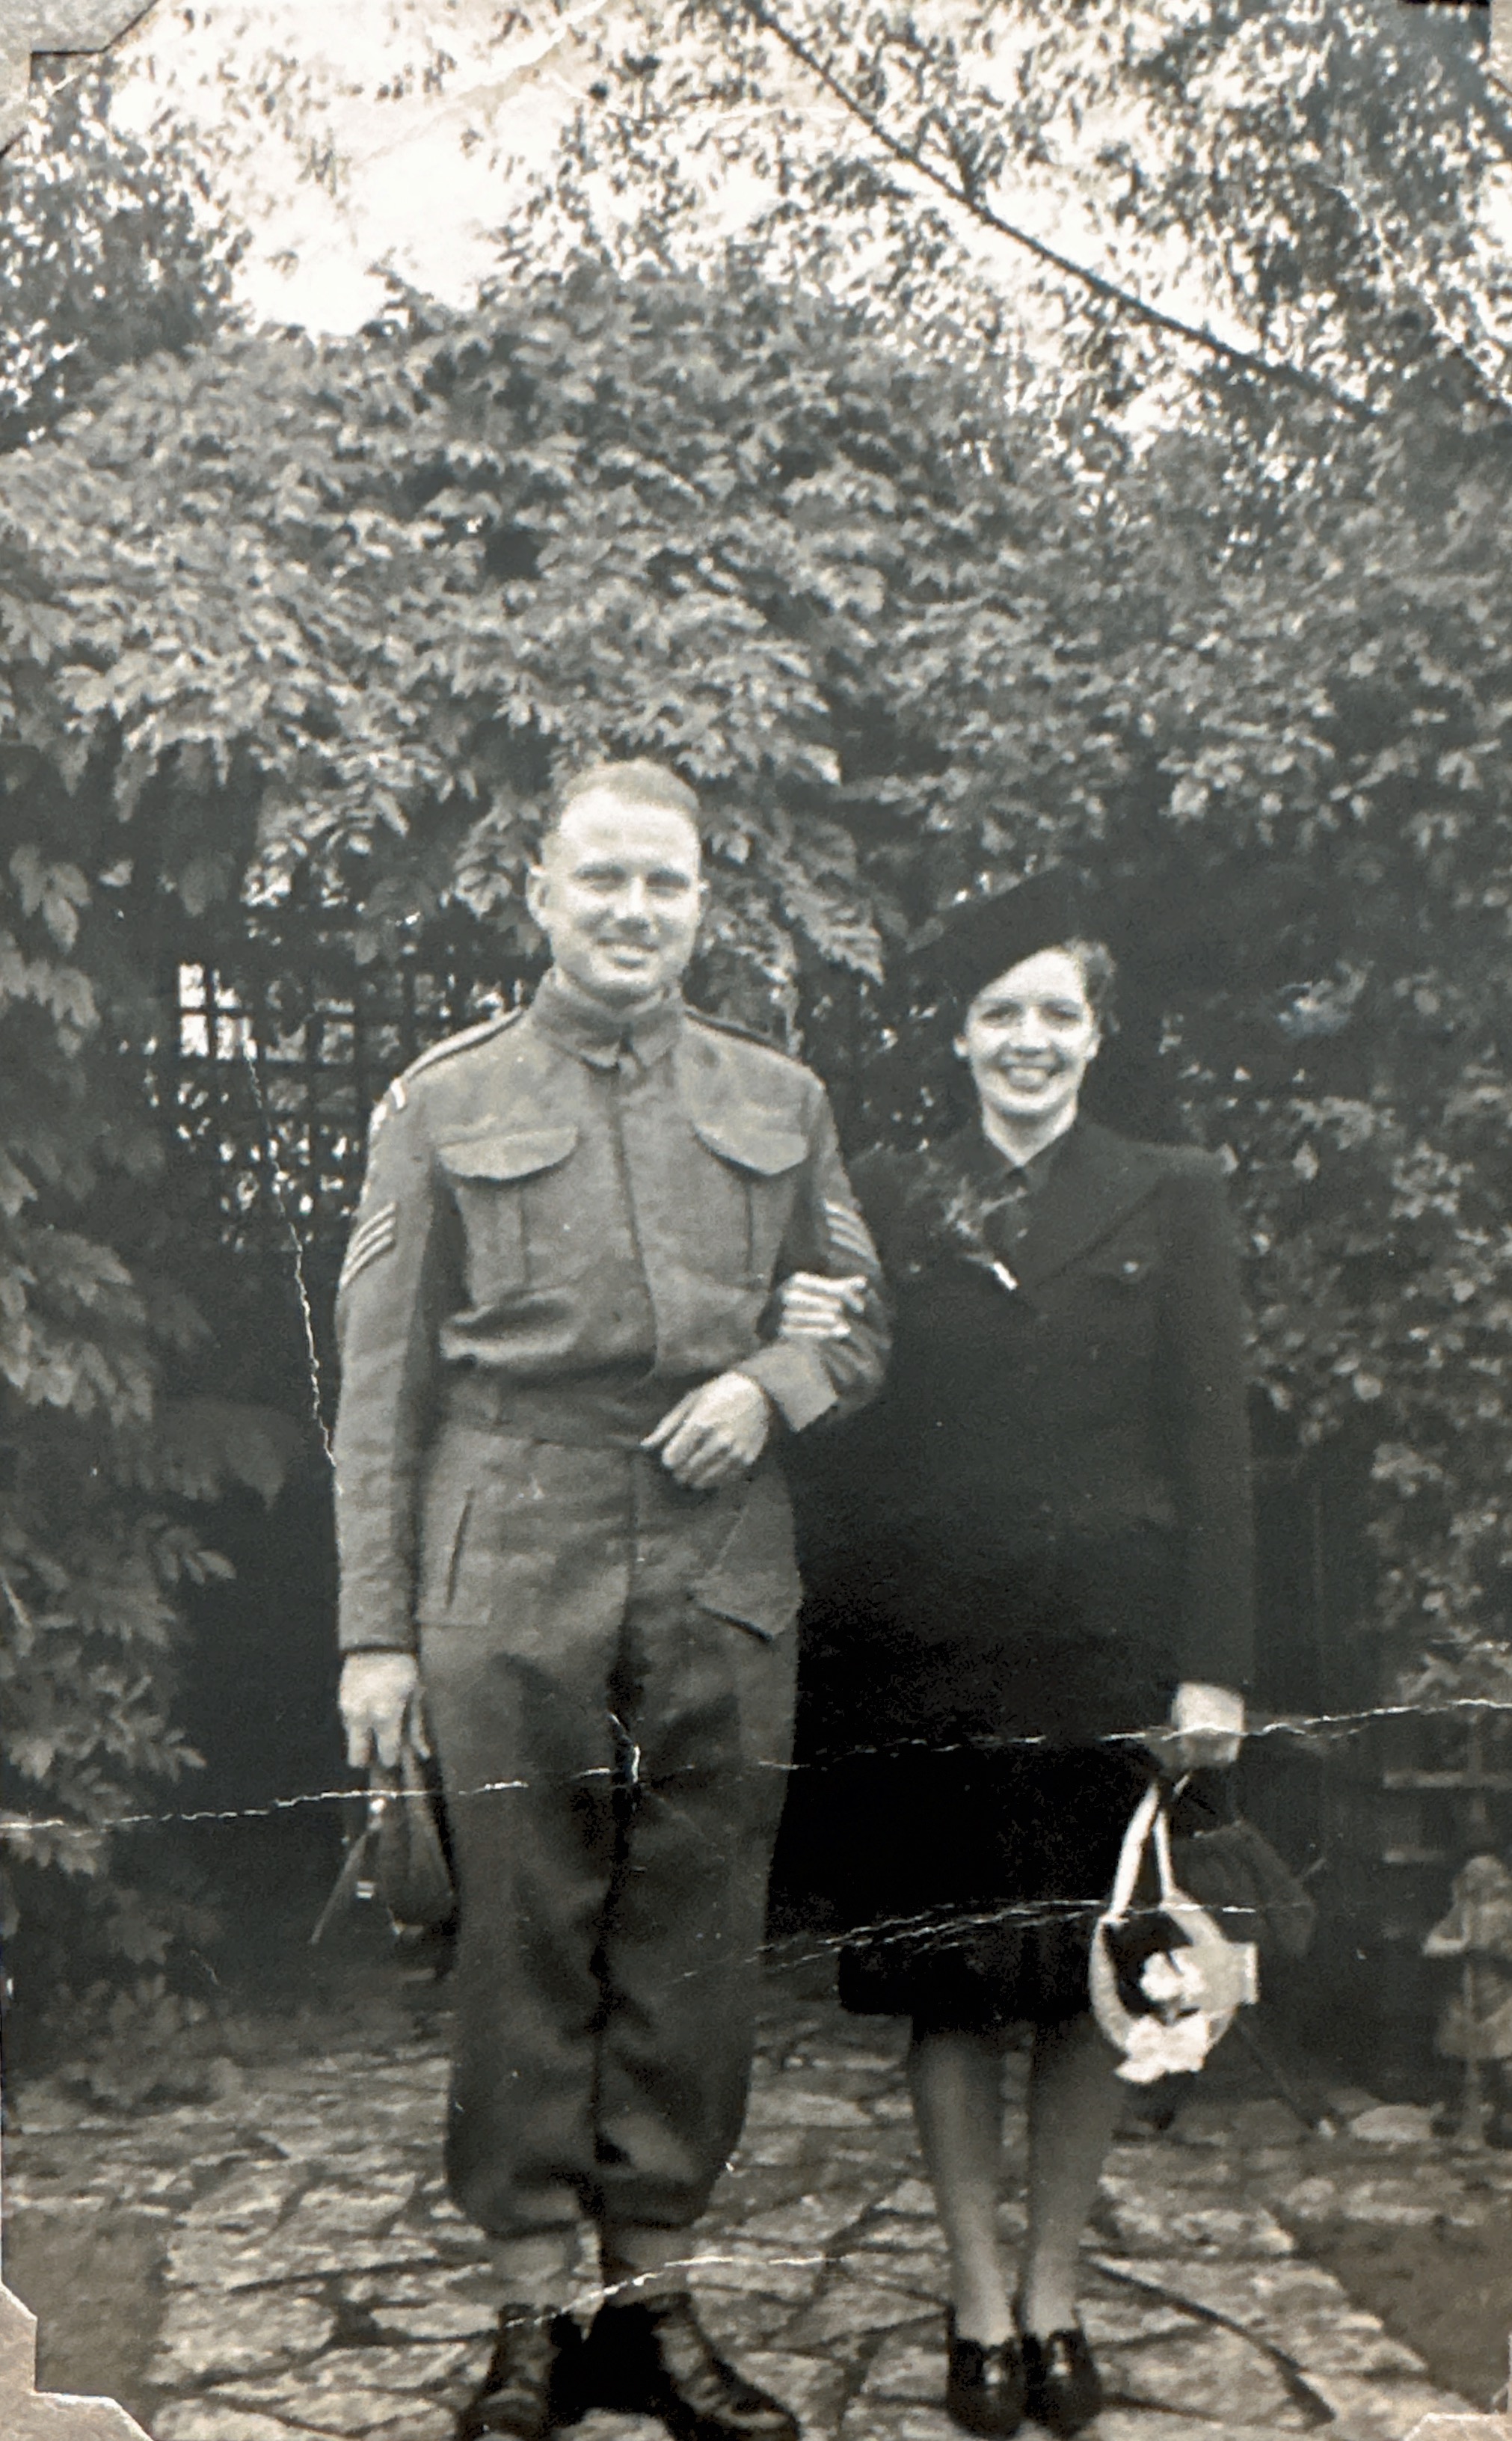 Anne and Wally Barrow on their wedding day, the 24th of September 1940